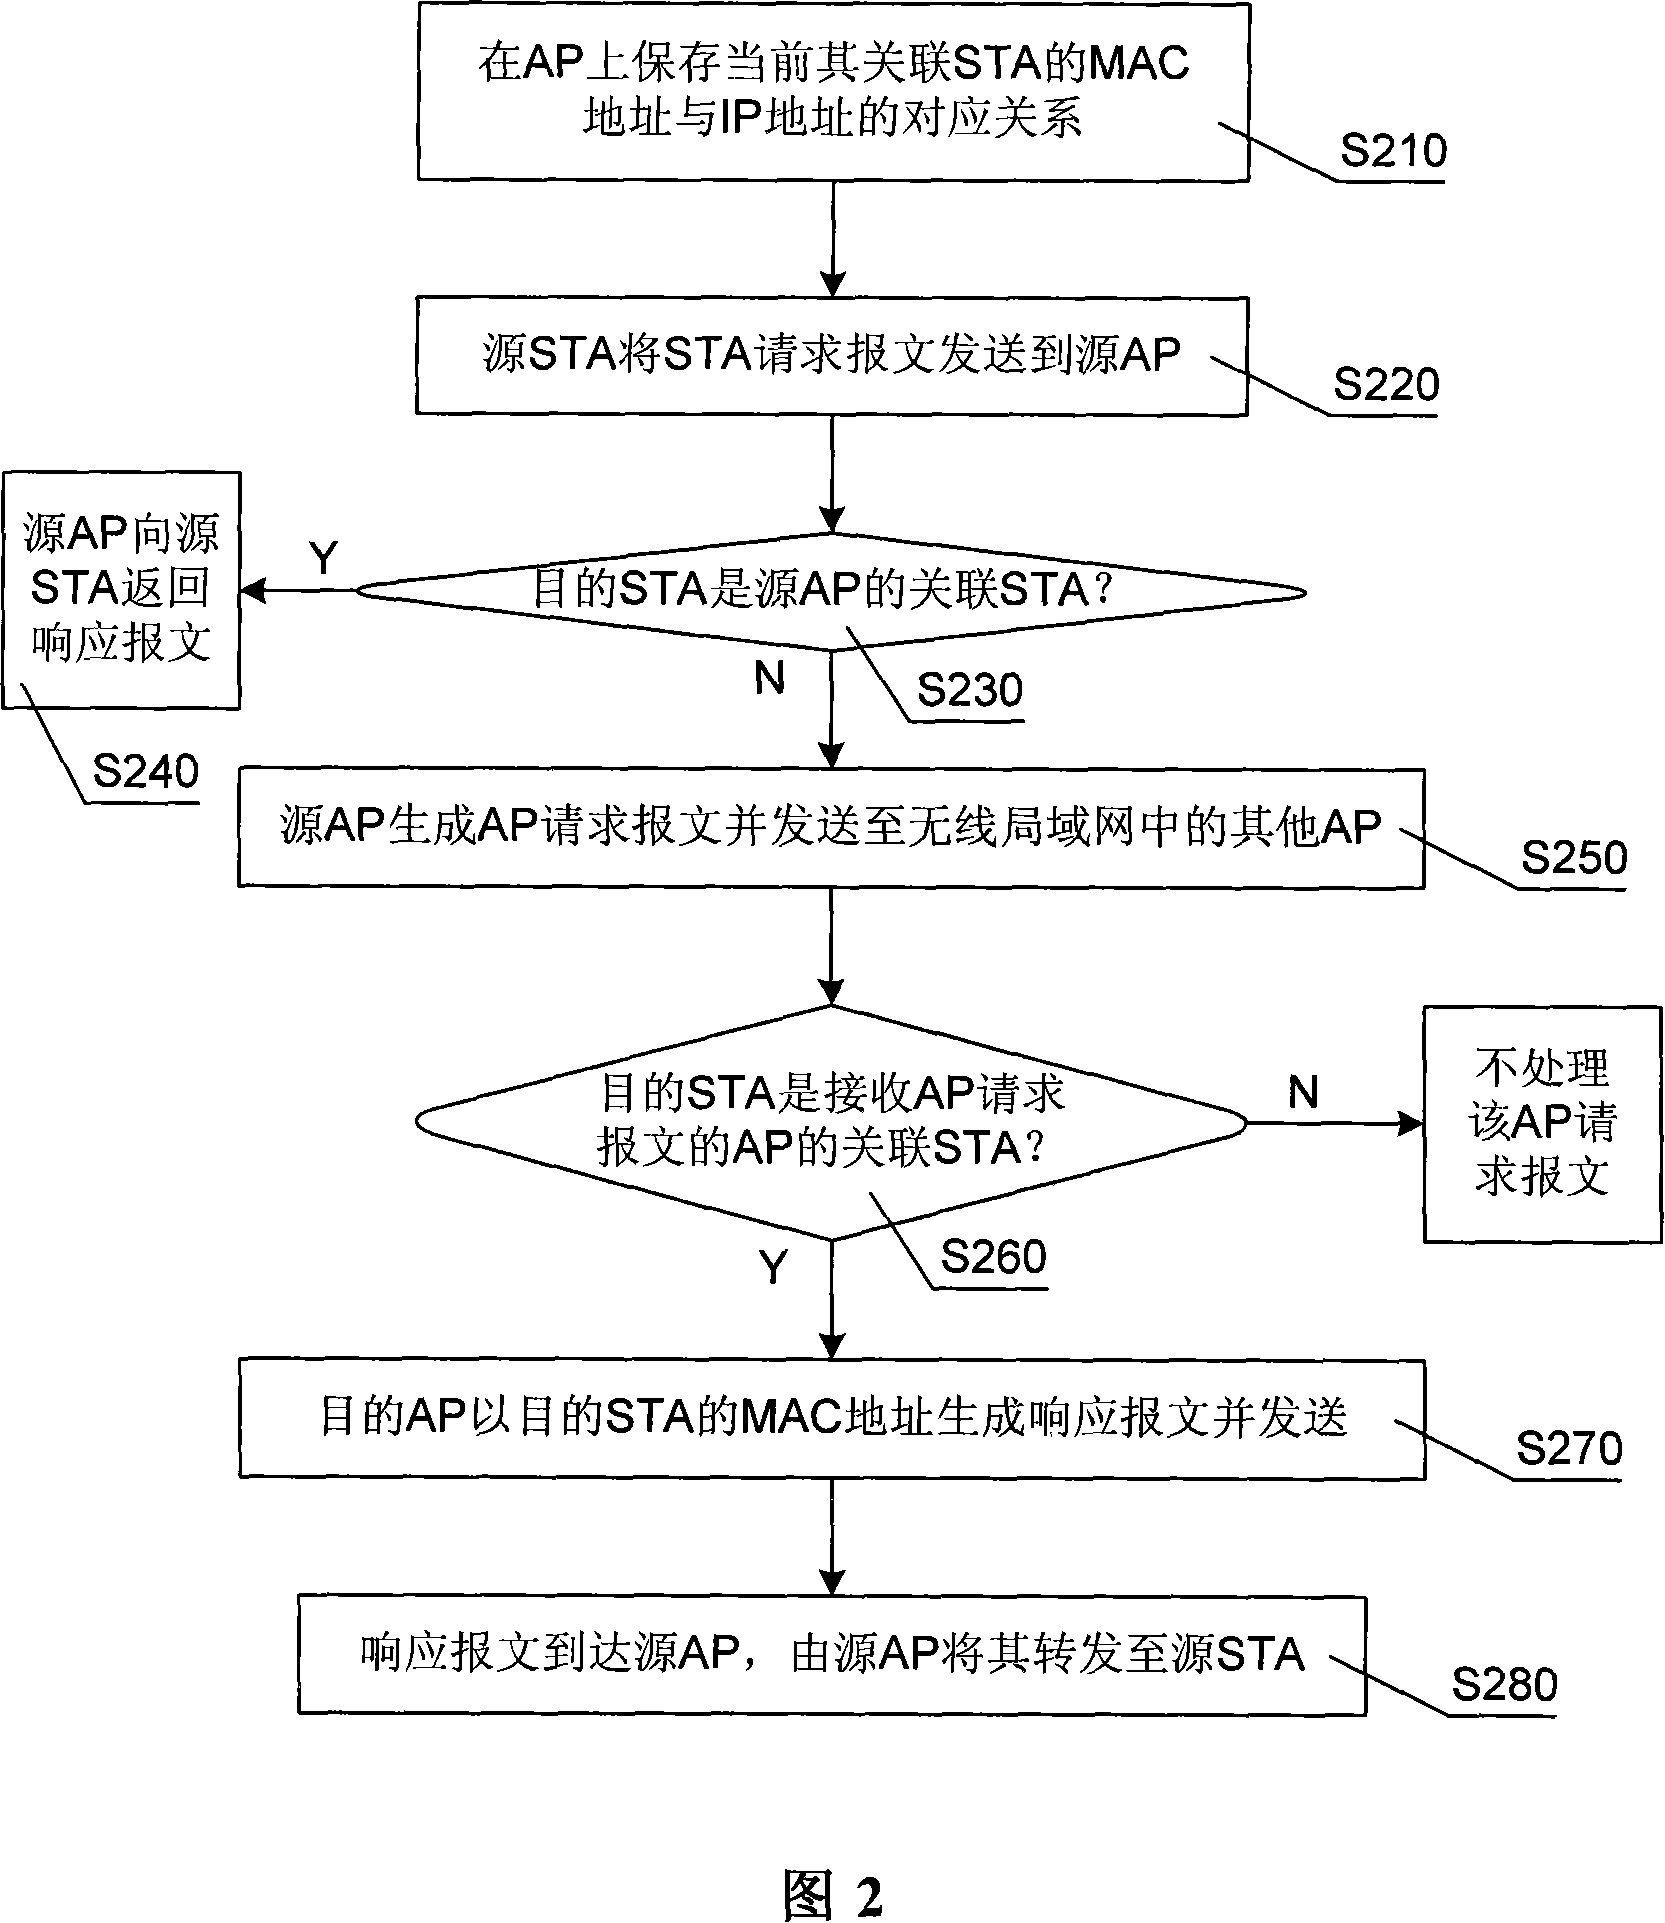 Address analysis method and access point of wireless LAN